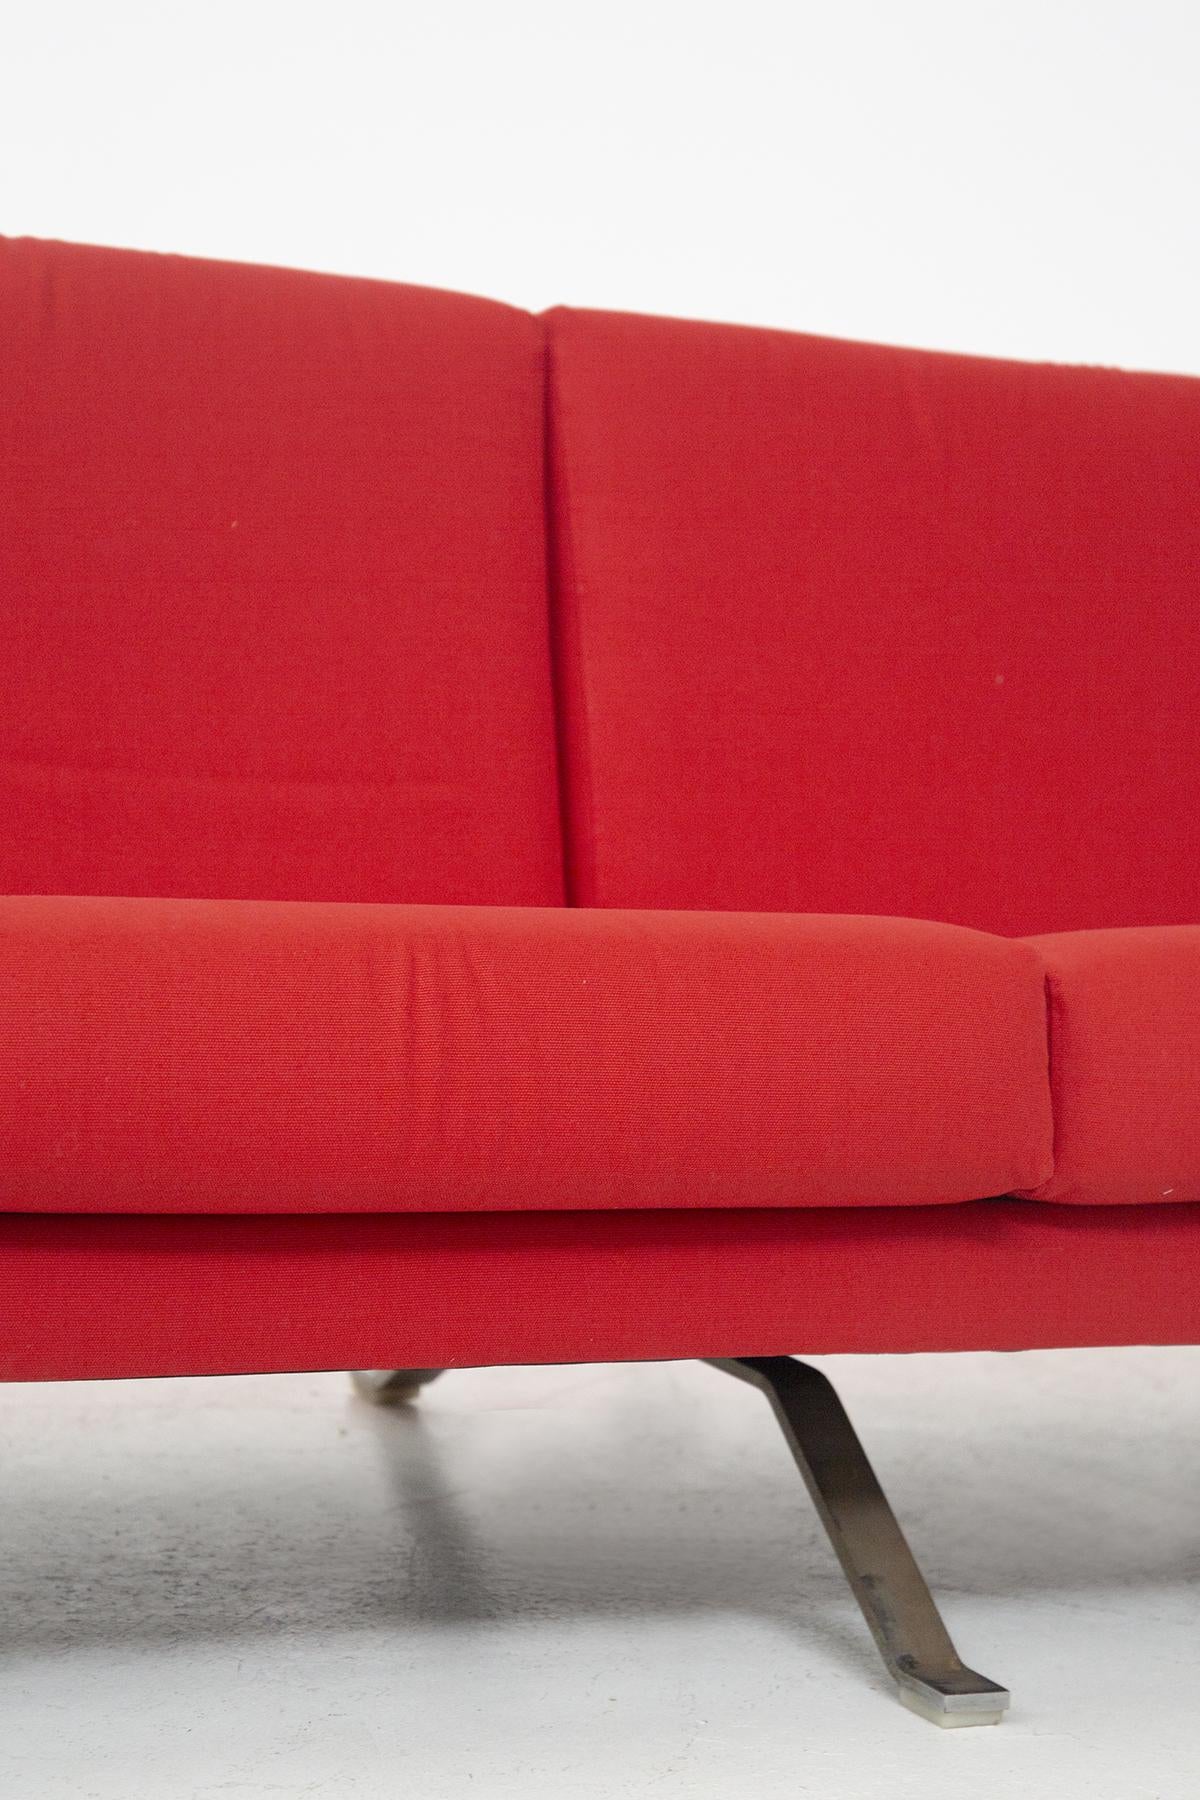 Mid-Century Modern Rare Italian Red Sofa by Ico Parisi for Cassina Mod. 875, Published For Sale